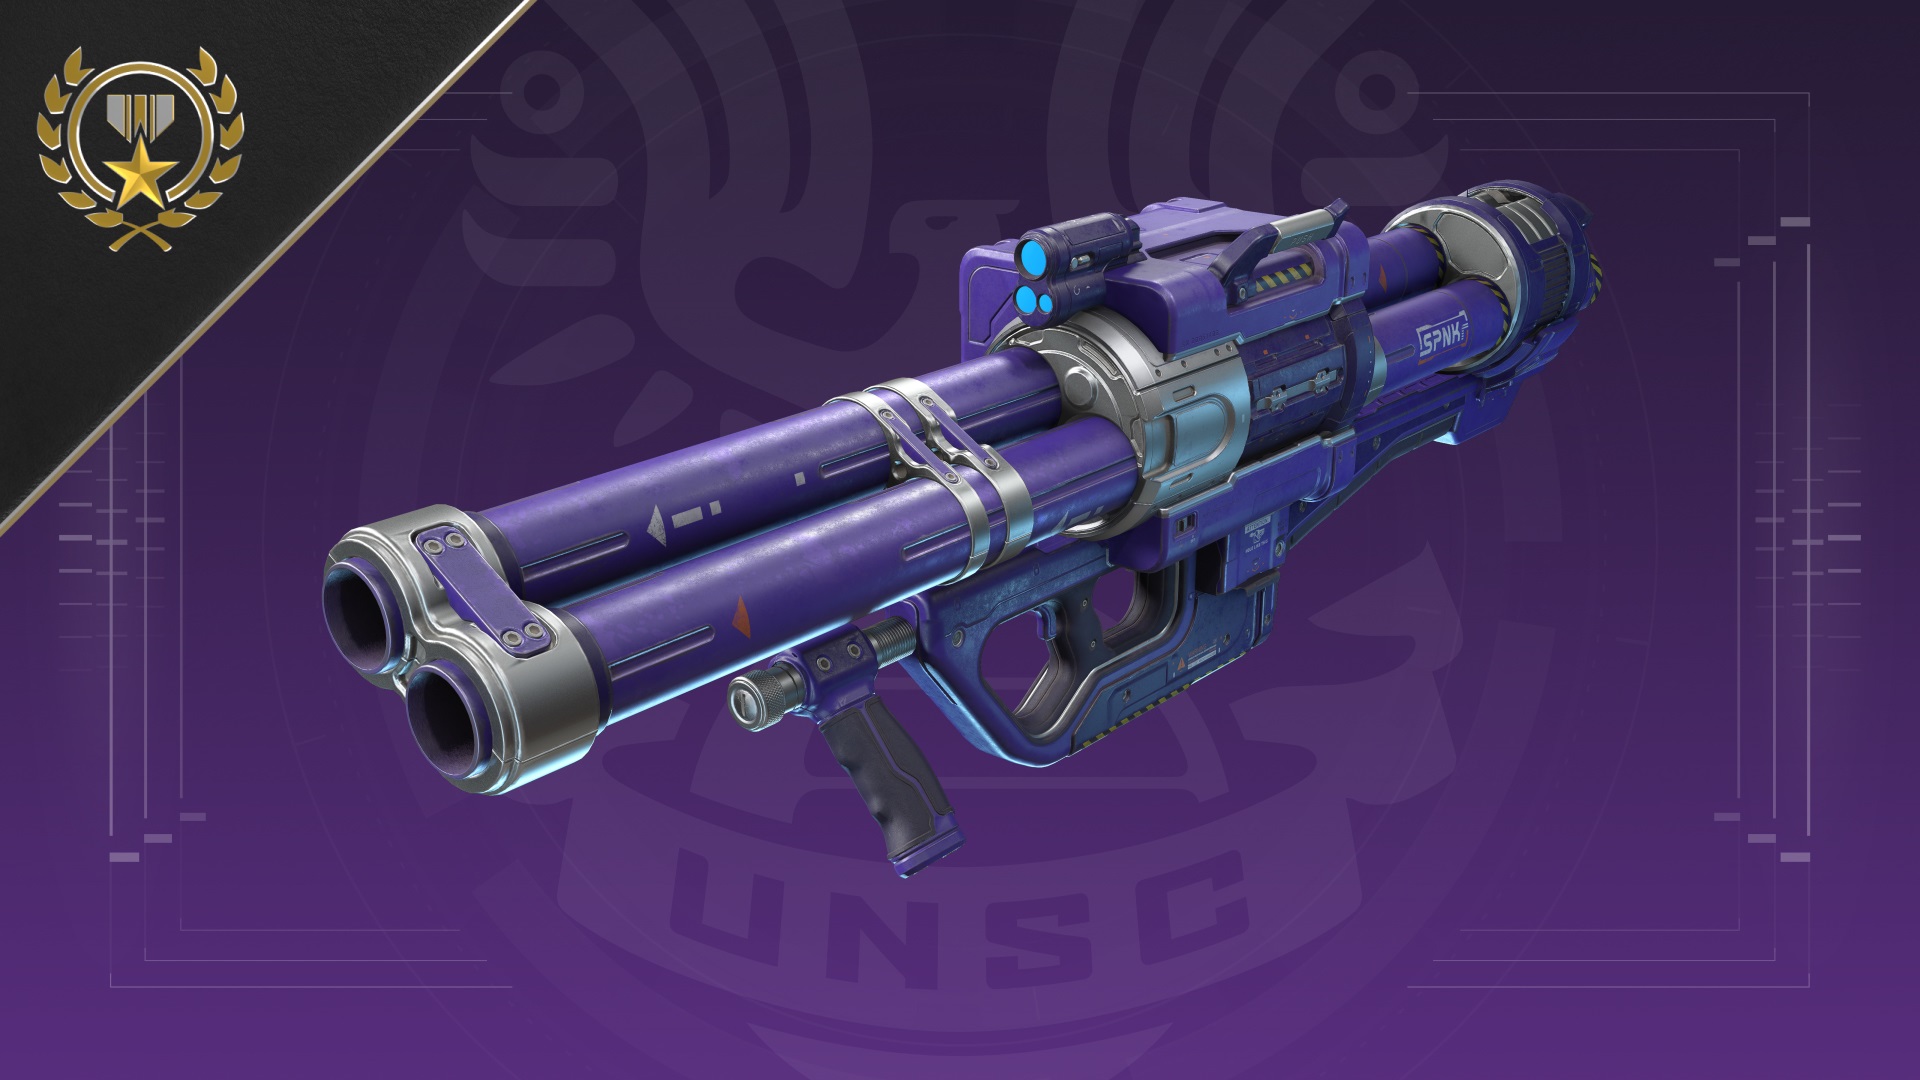 Halo Infinite Ultimate Reward image of the Purple Reign coating for the M41 SPNKr